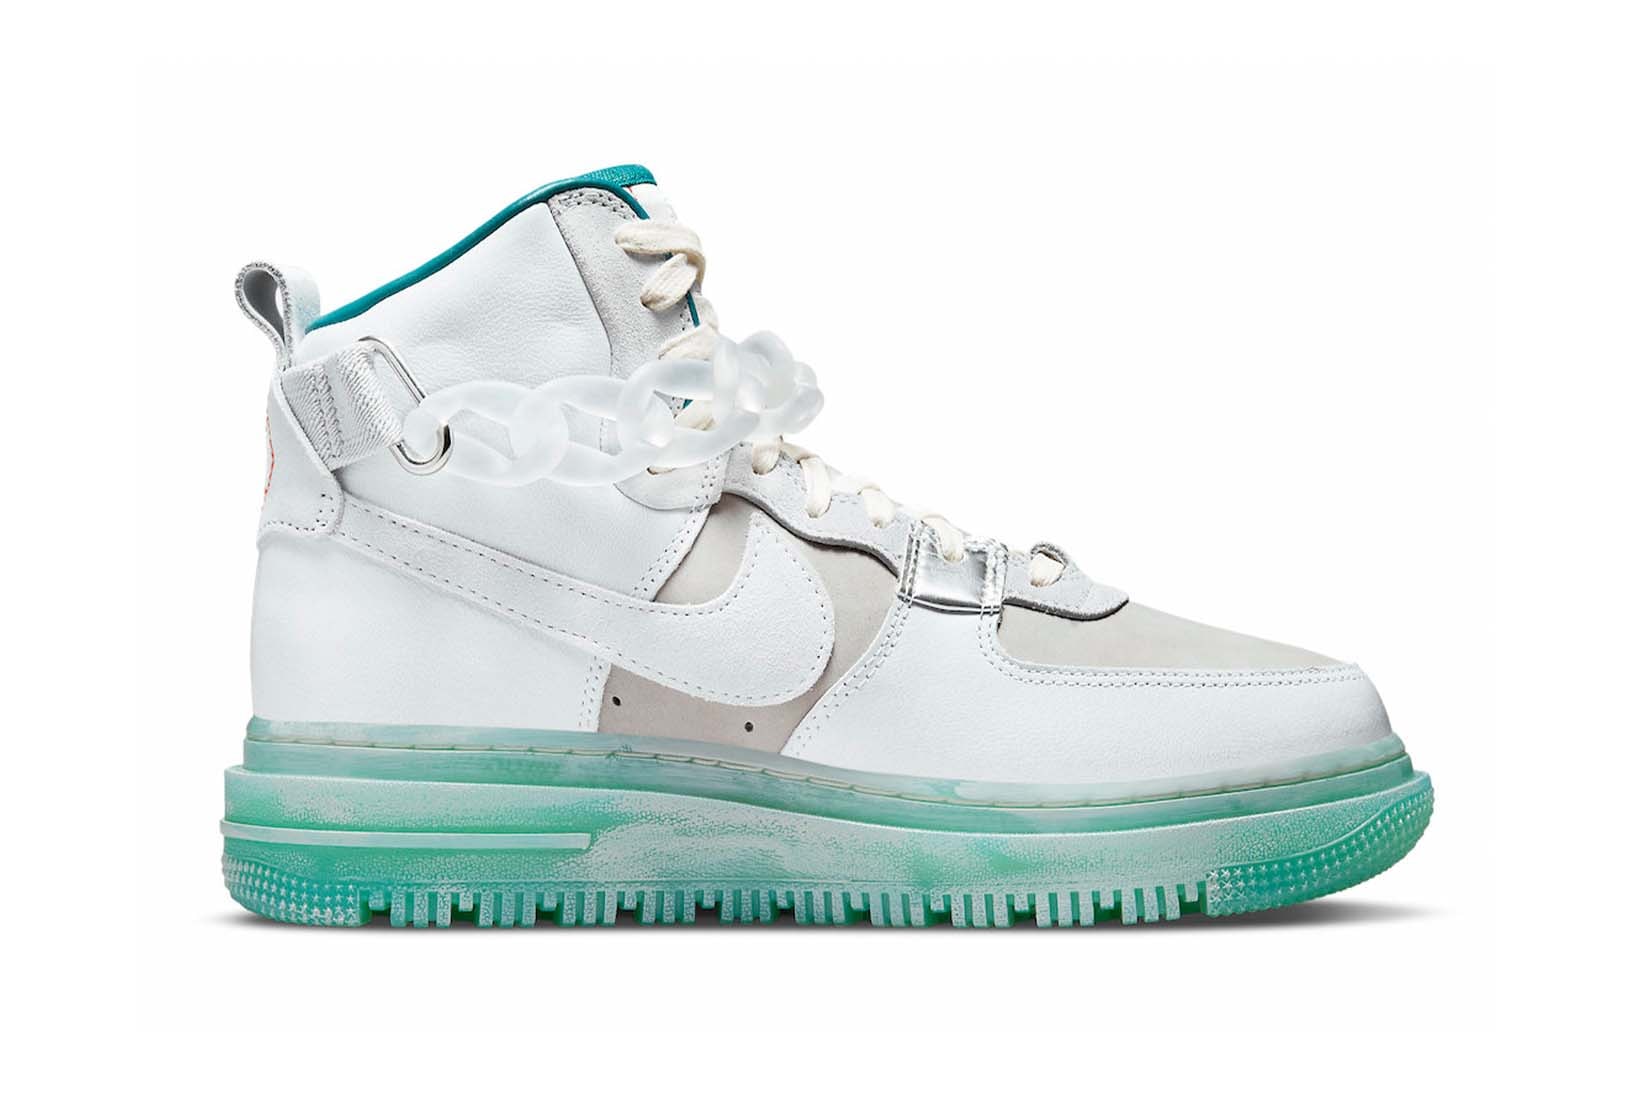 Air Force 1 High Utility 2.0 Shapeless Formless Limitless Price Release Date